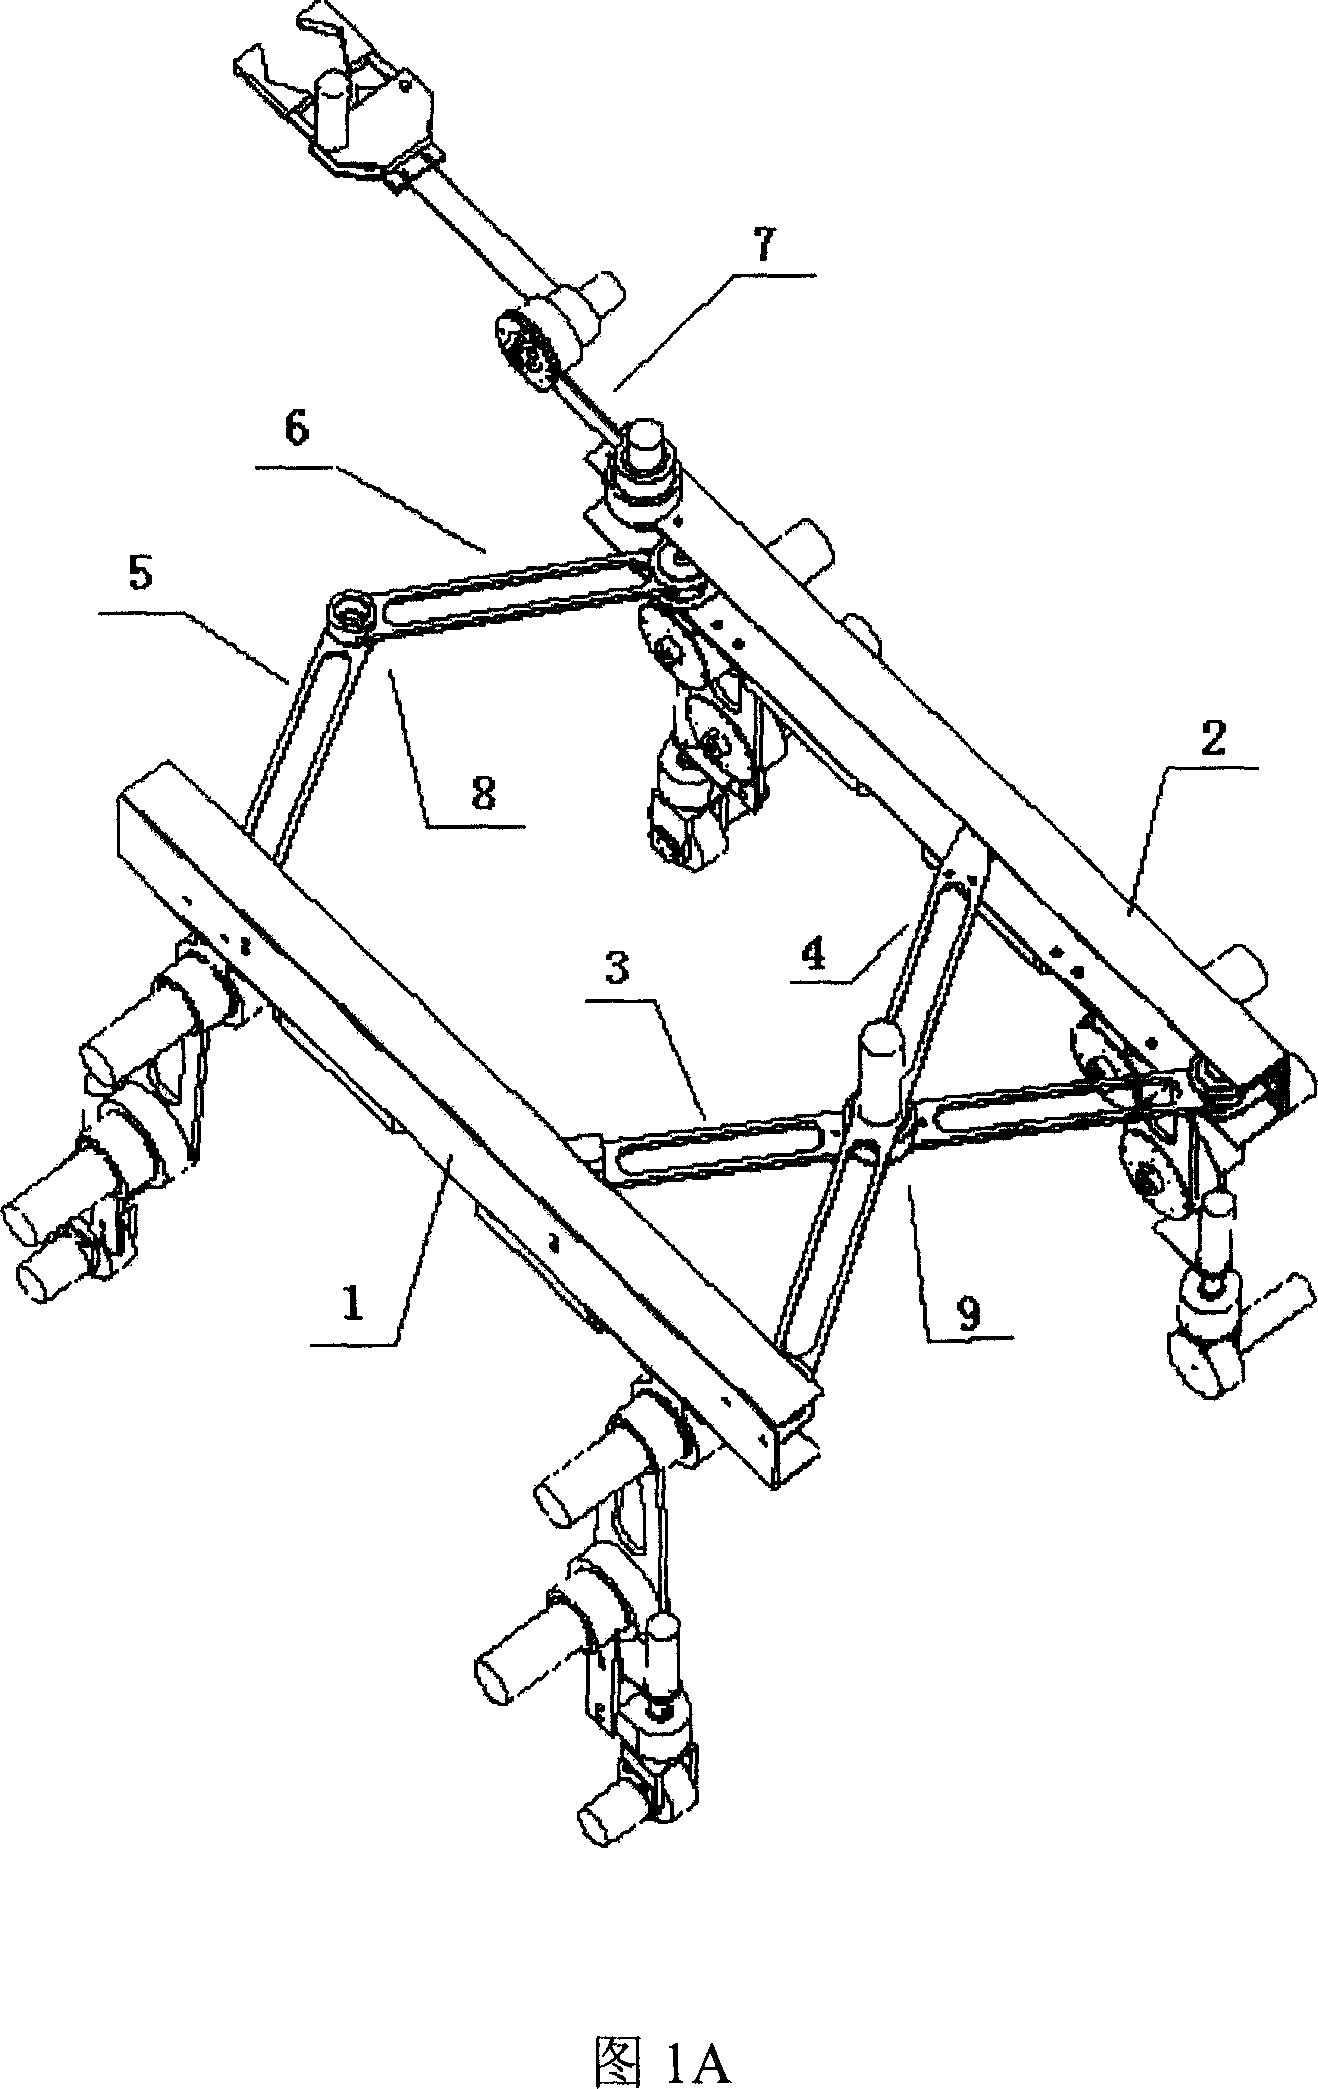 Variable-structure leg wheel type machine insect